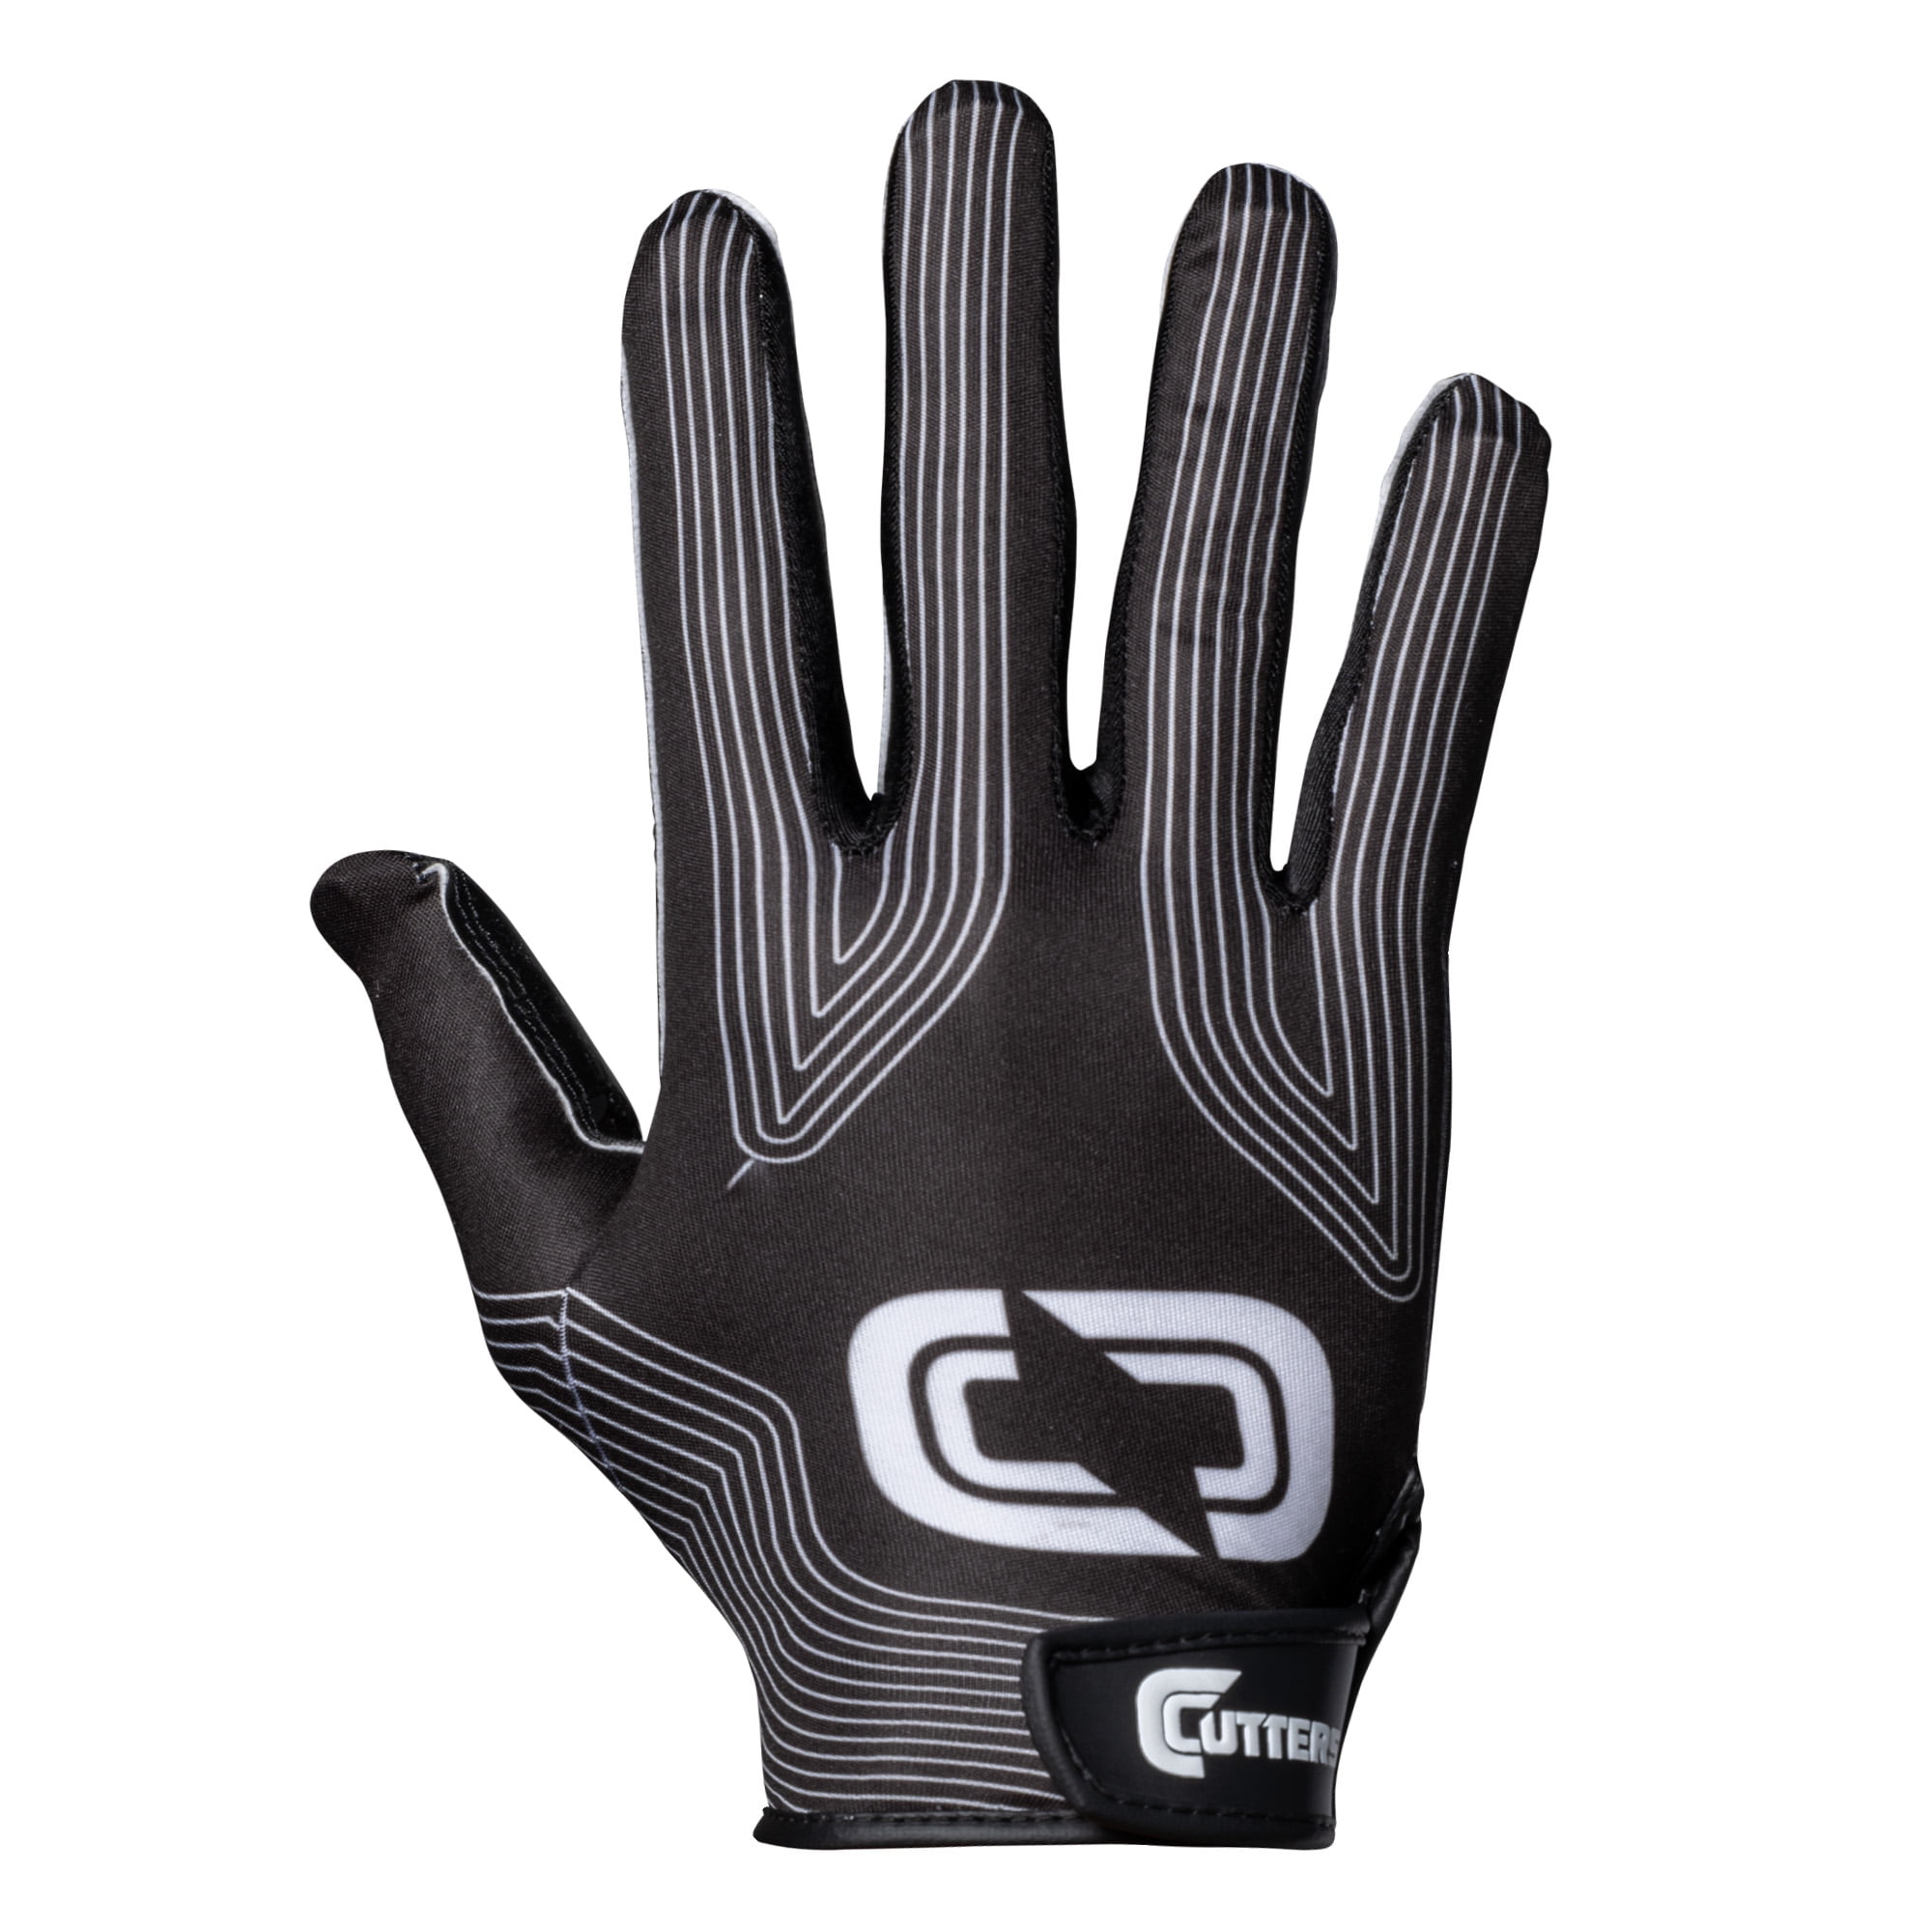 Cutters Epic Football Receiver Glove, Black, Youth, Small/Medium